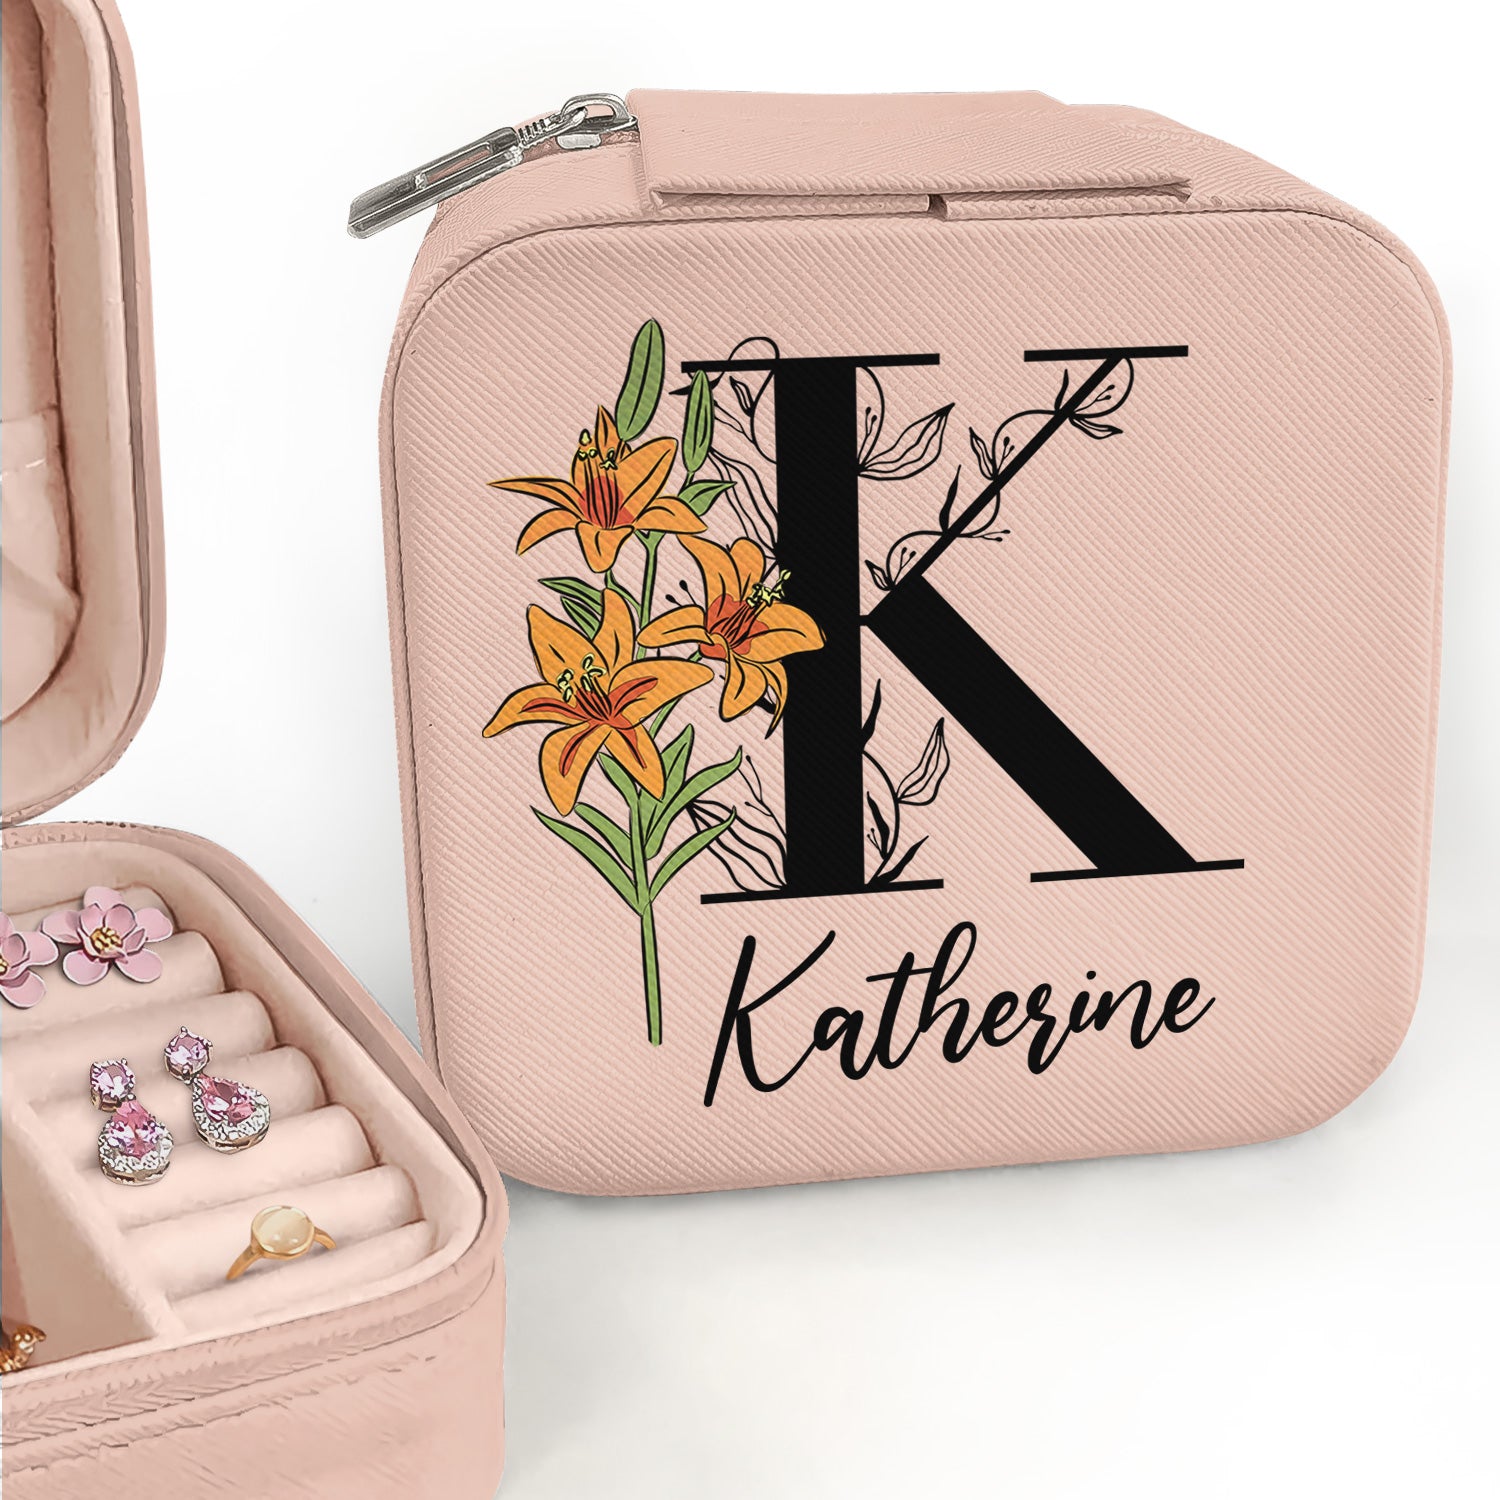 Birth Flower With Name - Gift For Her, Gift For Women - Personalized Jewelry Box